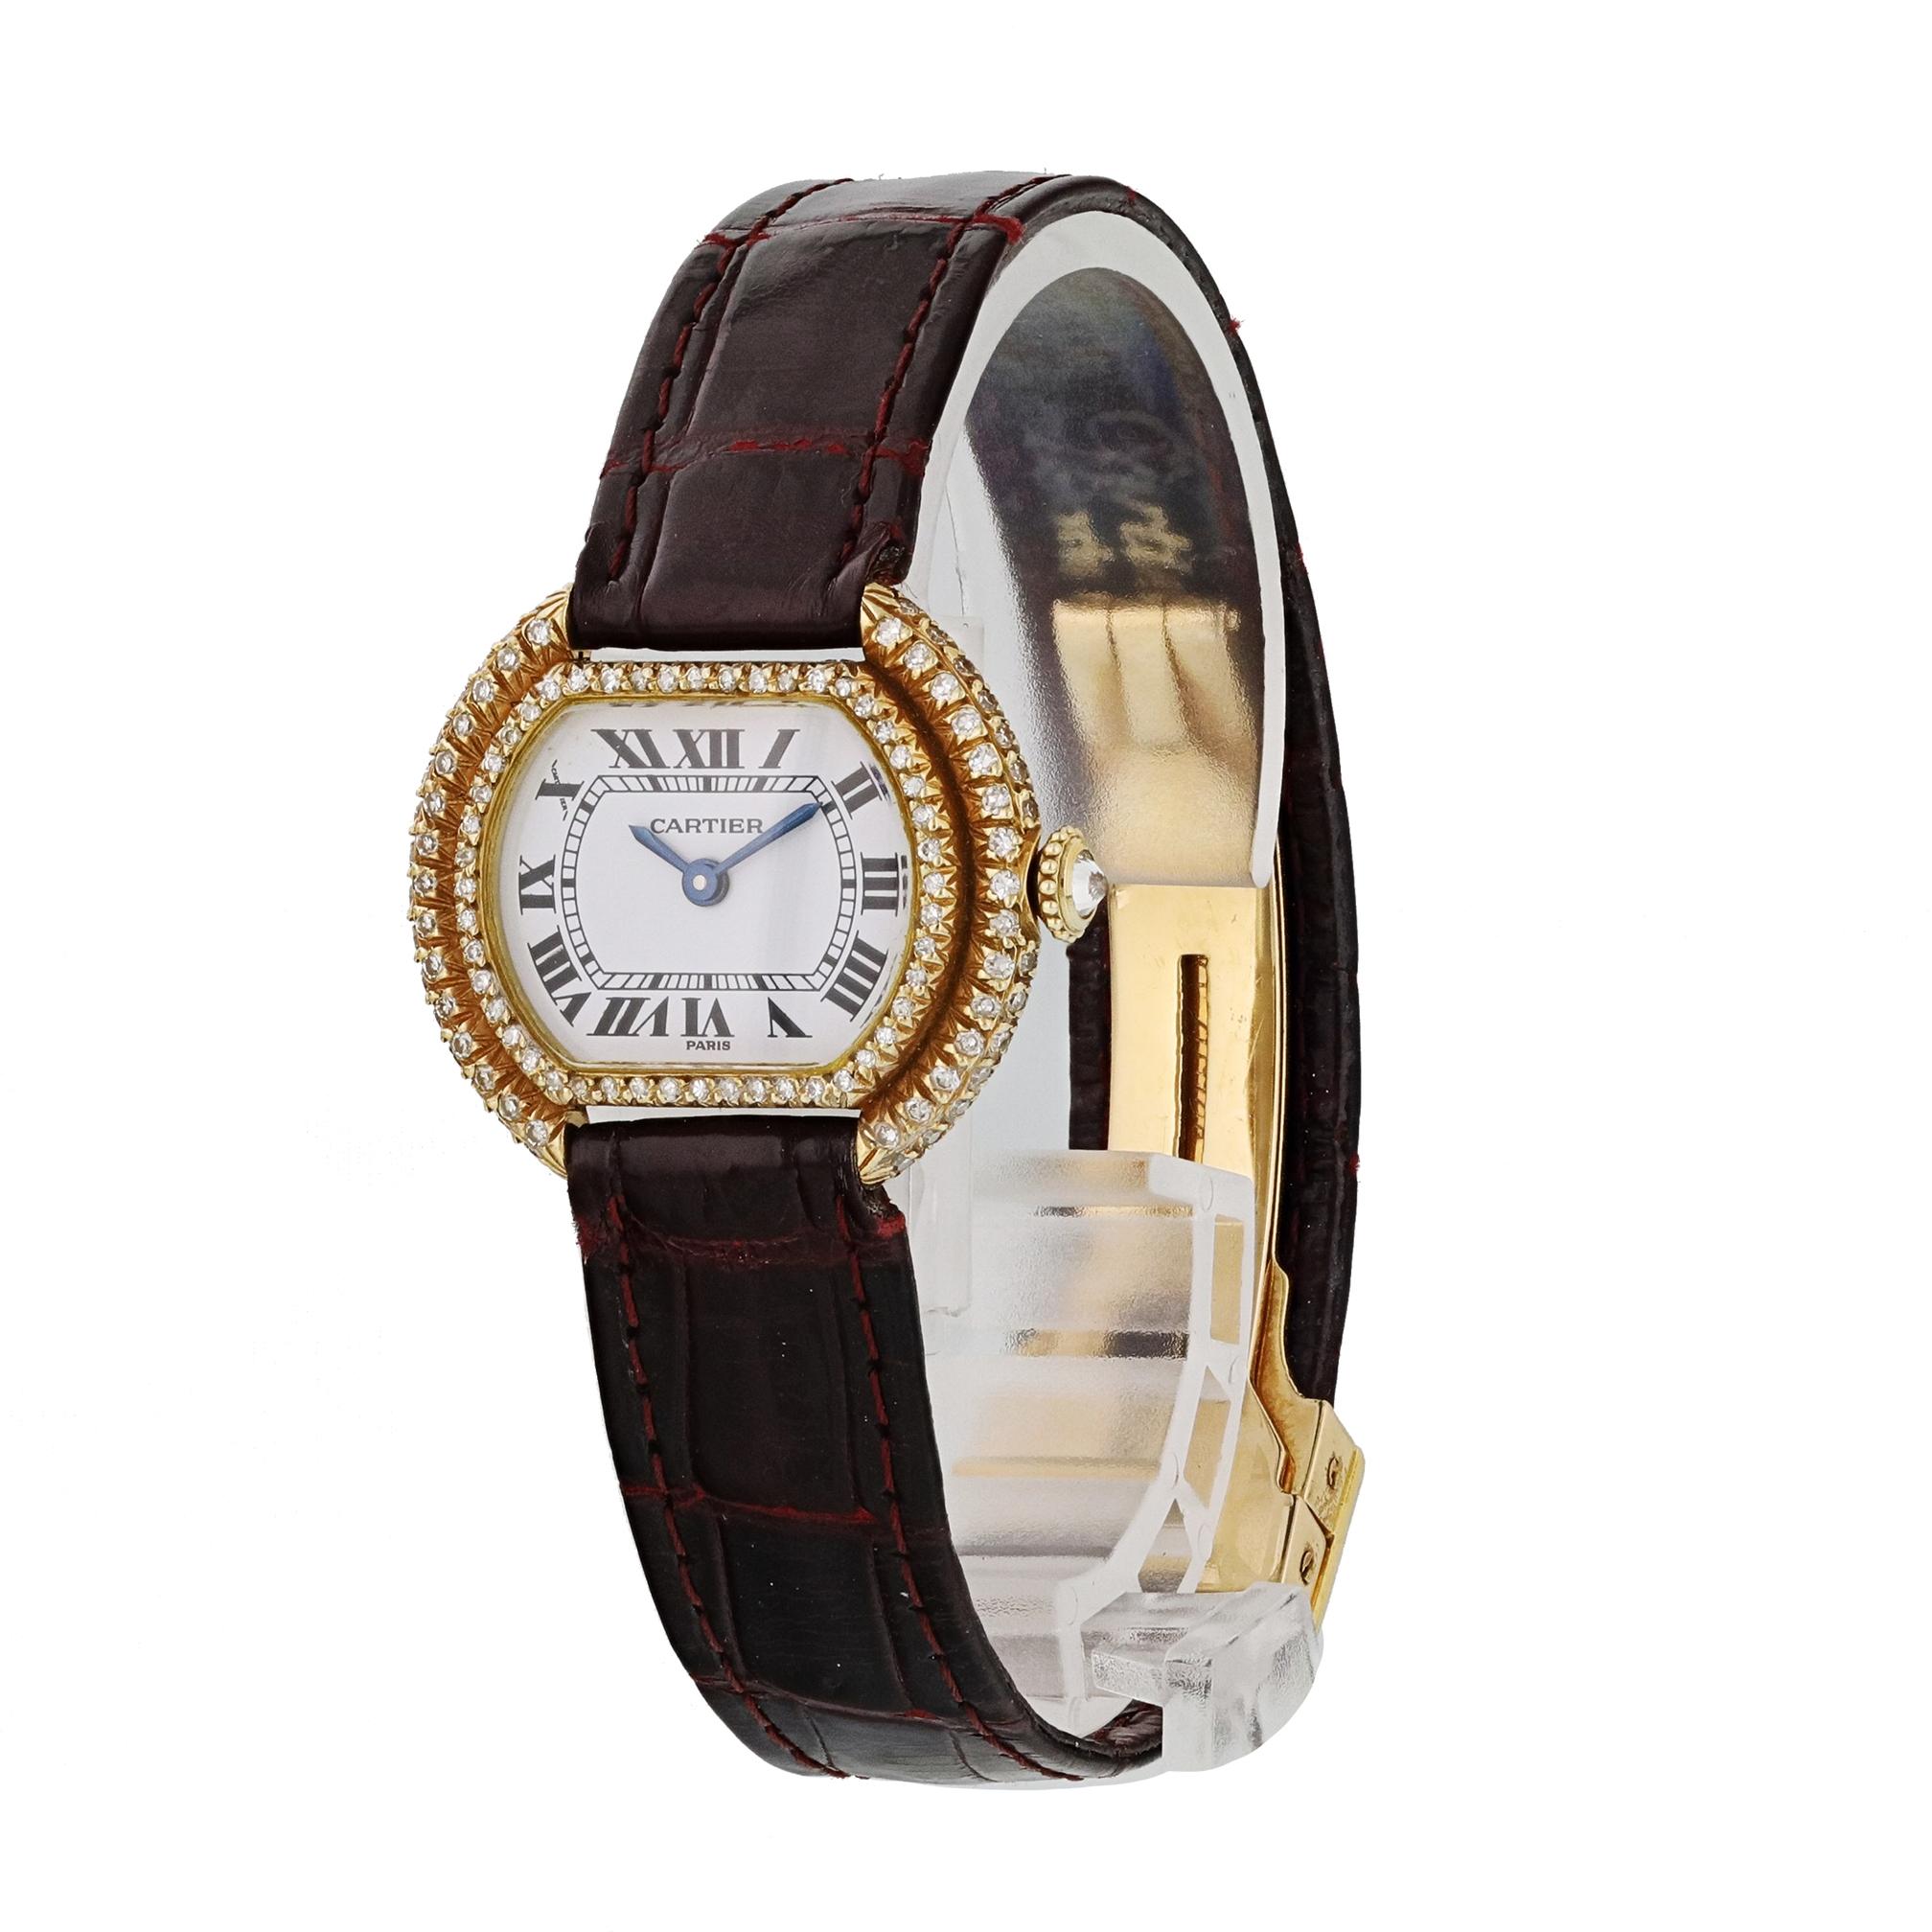 Cartier Paris Ellipse Gondole 18k Yellow Gold Ladies Watch.
28mm 18k Yellow Gold case hand set with diamonds. 
Yellow Gold Stationary bezel hand set with diamonds. 
White dial with Blue steel hands and roman numeral hour markers. 
Minute markers on